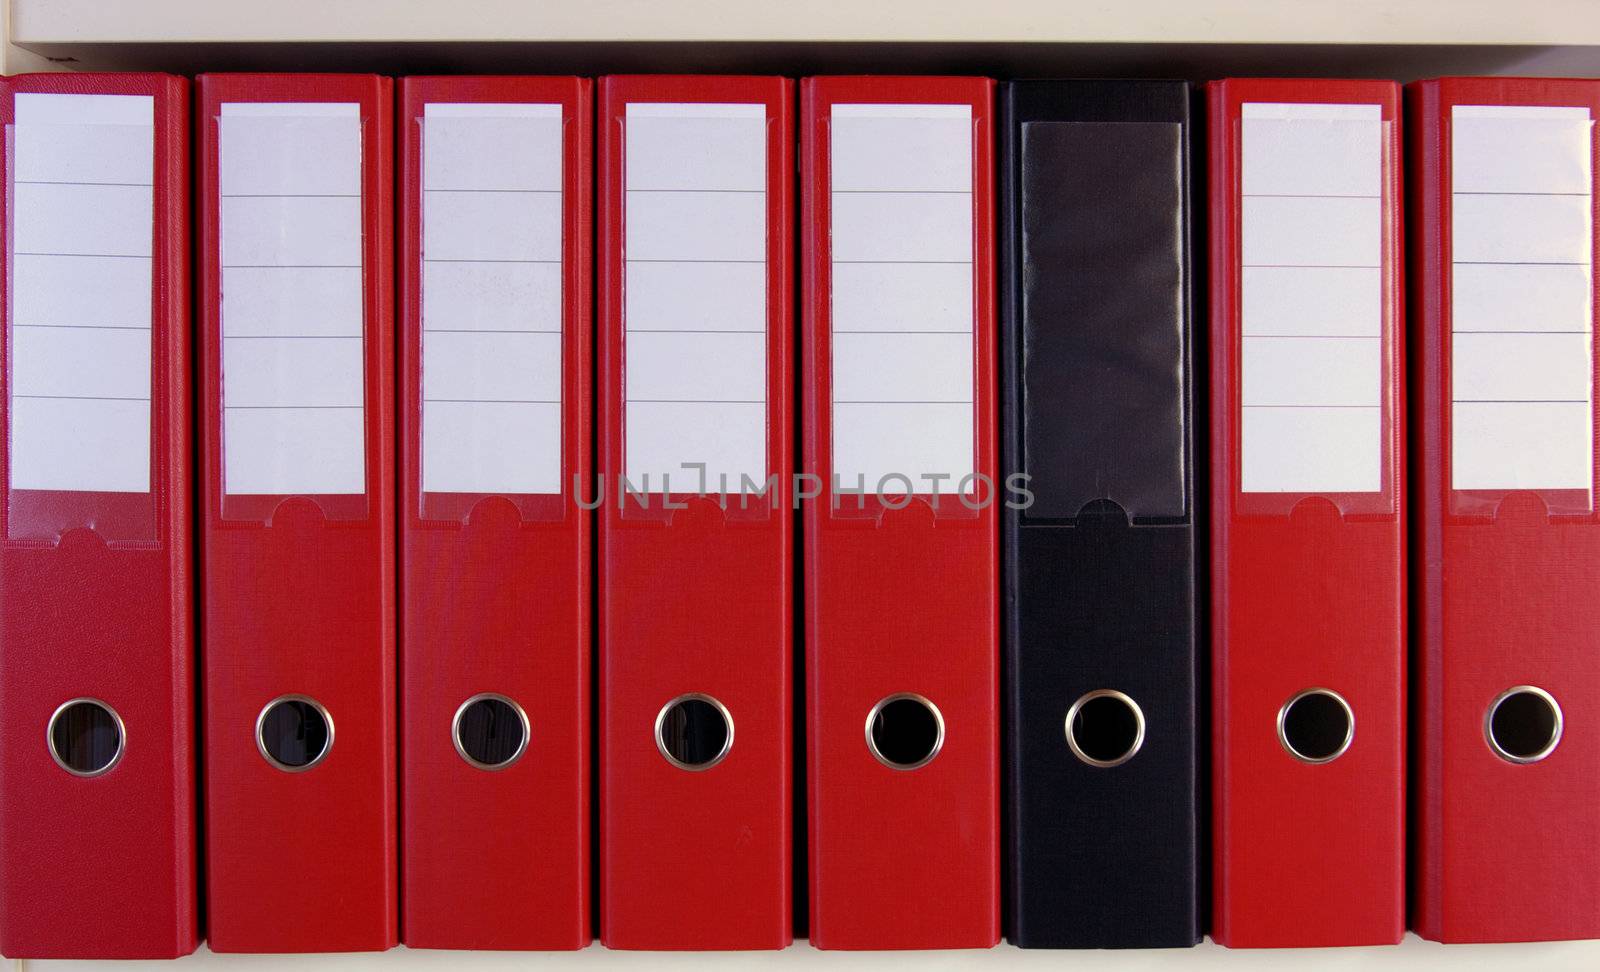 A row of red lever arch files on a shelf, with one black, un-marked one in their midst.